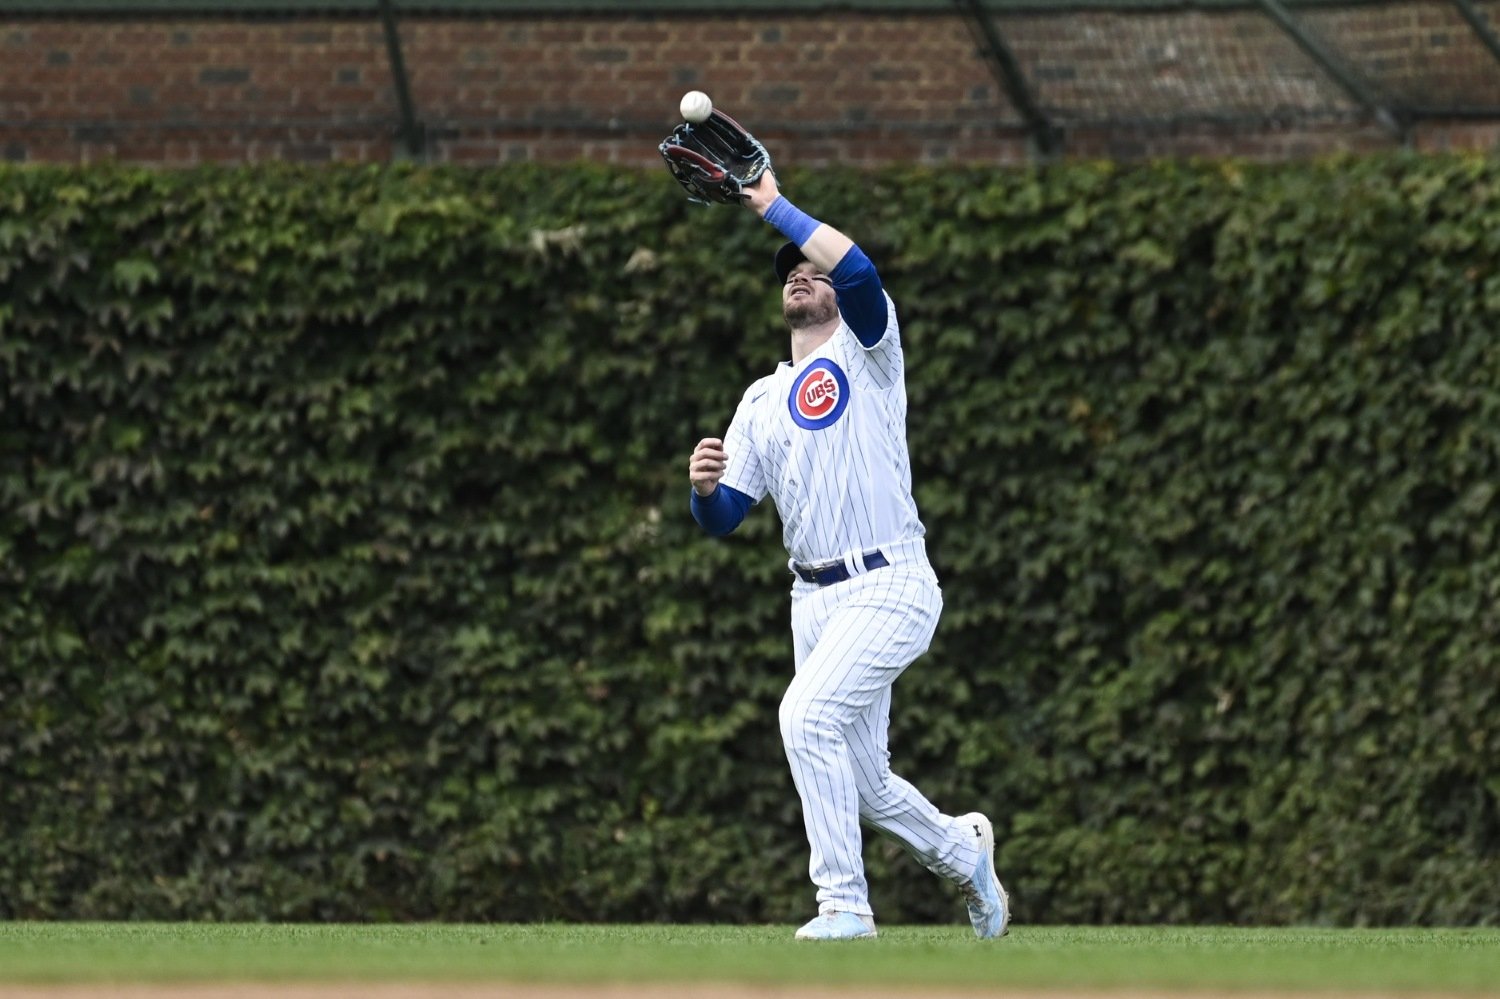 Ian Happ is Playing Defense Like the Ball is Alive and Hates Him - Cubs -  North Side Baseball